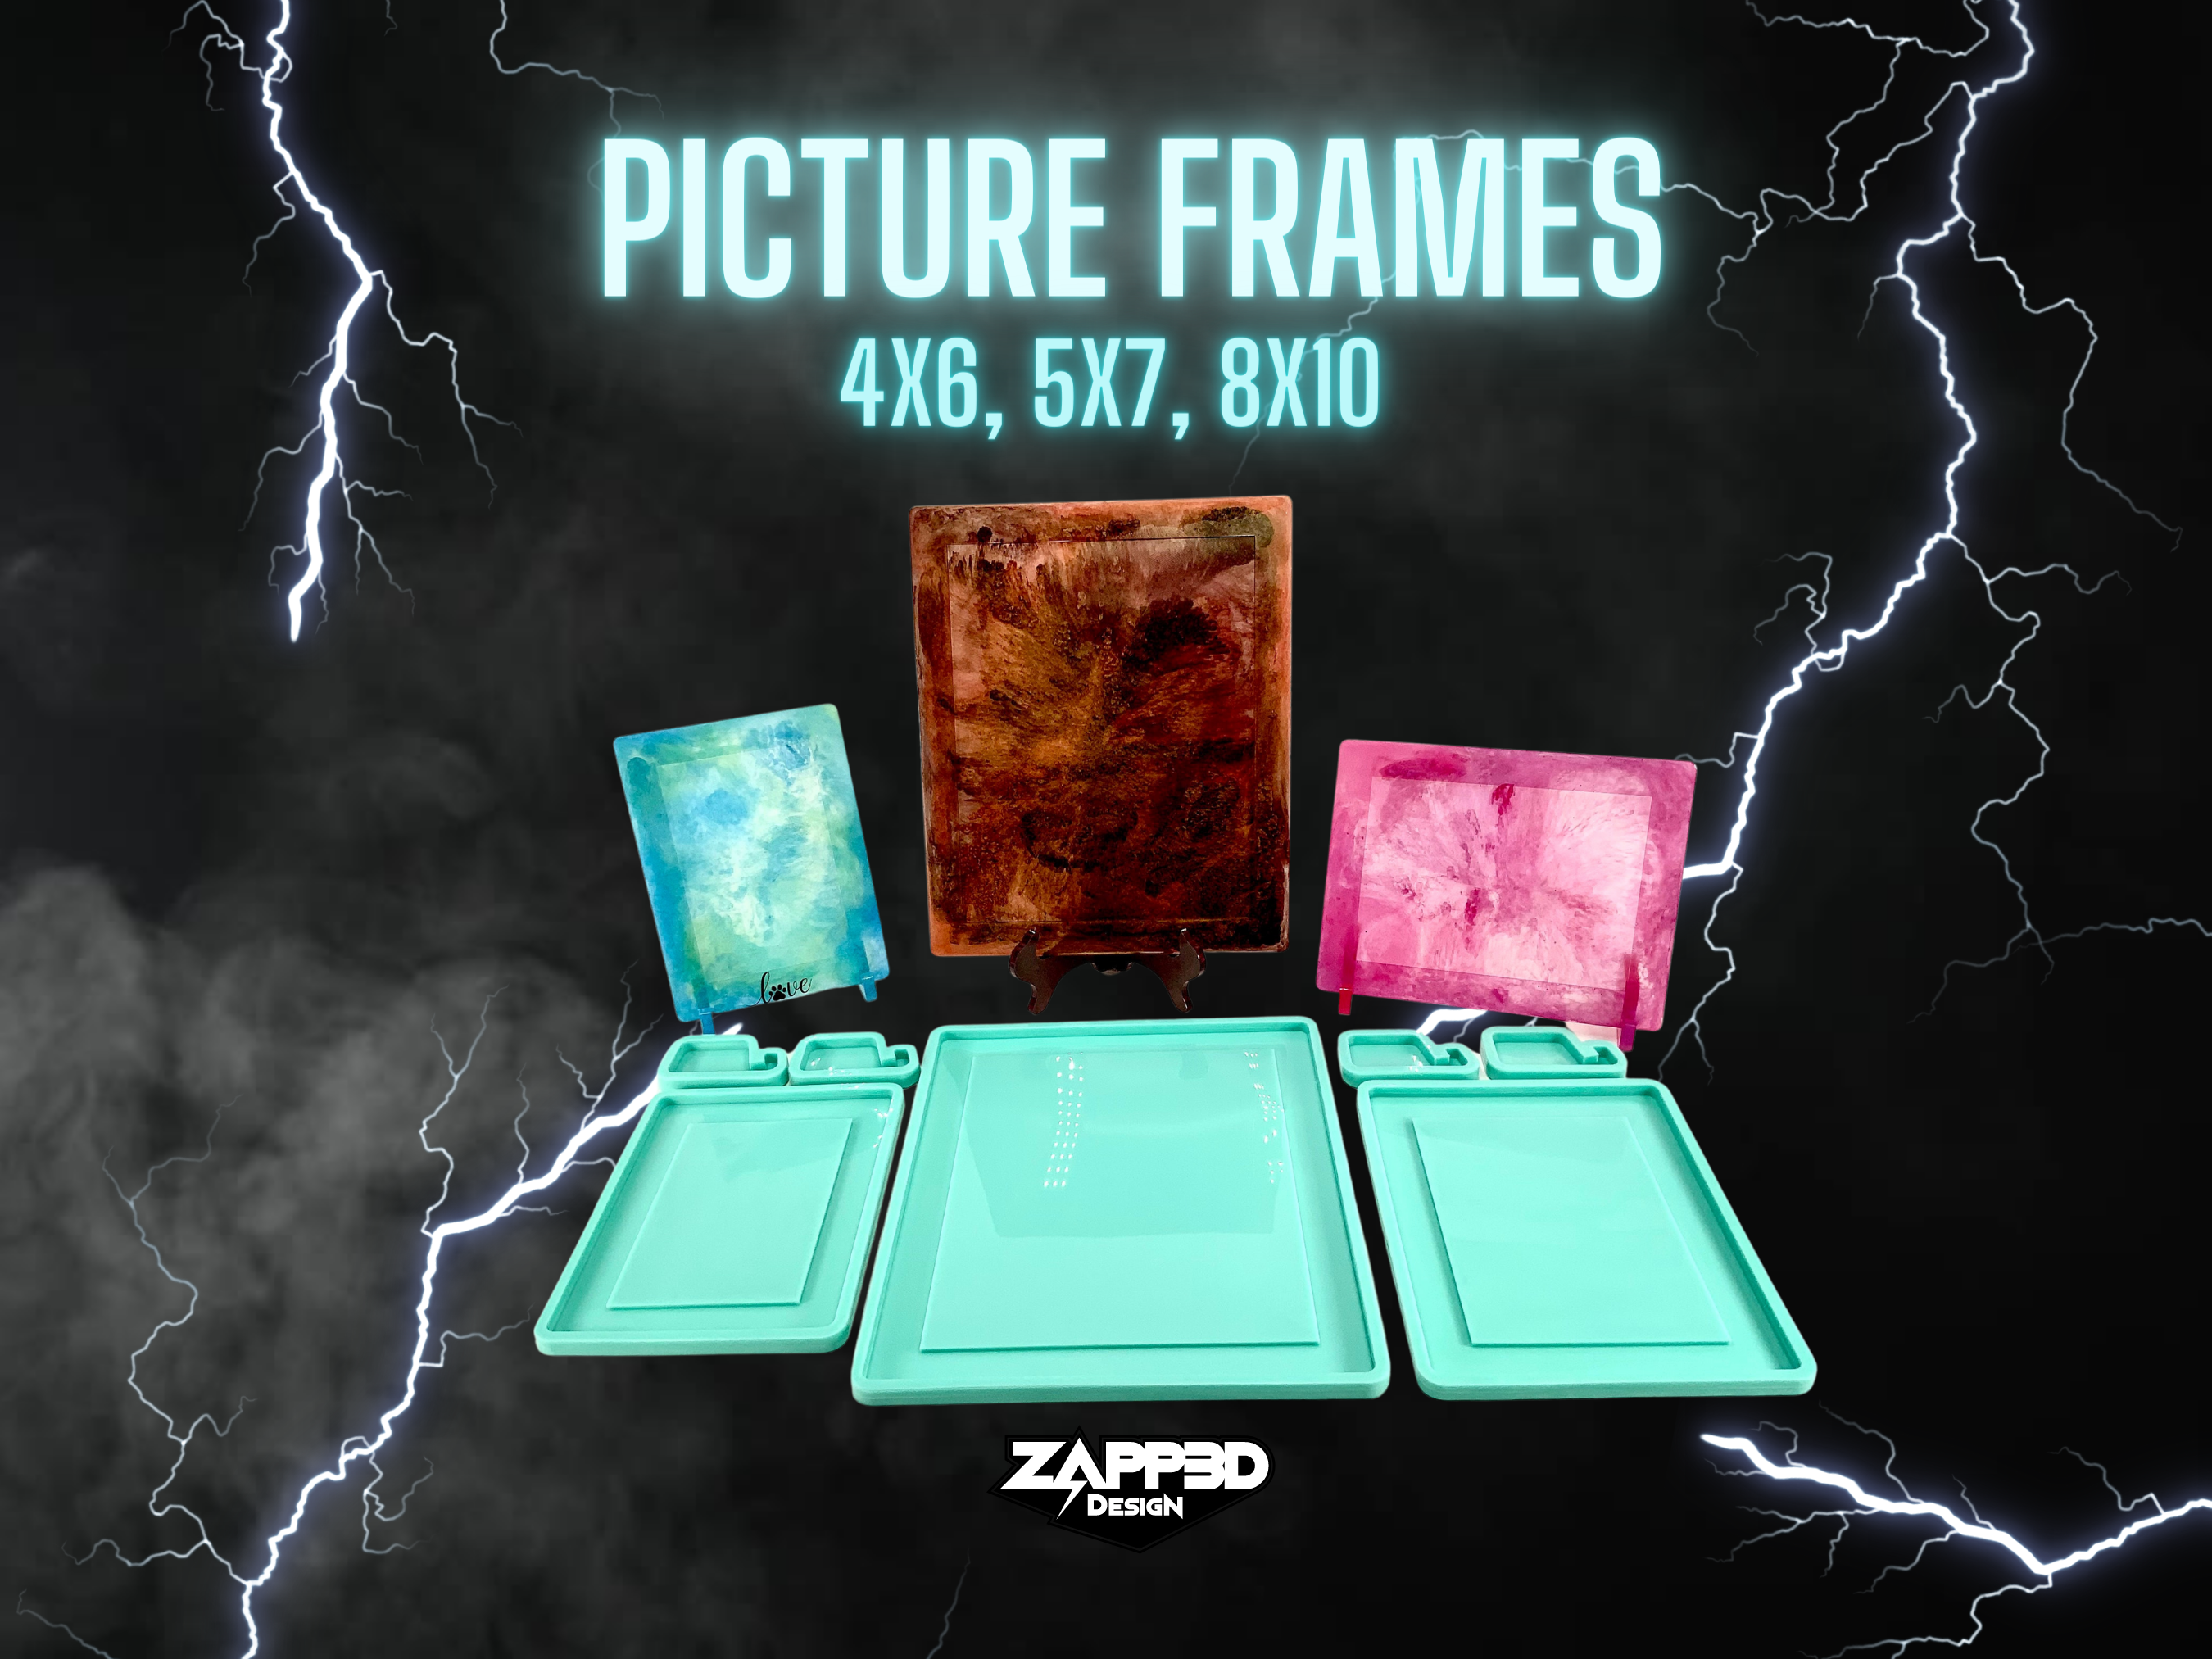 Small 4x6 and 5x7 Frames